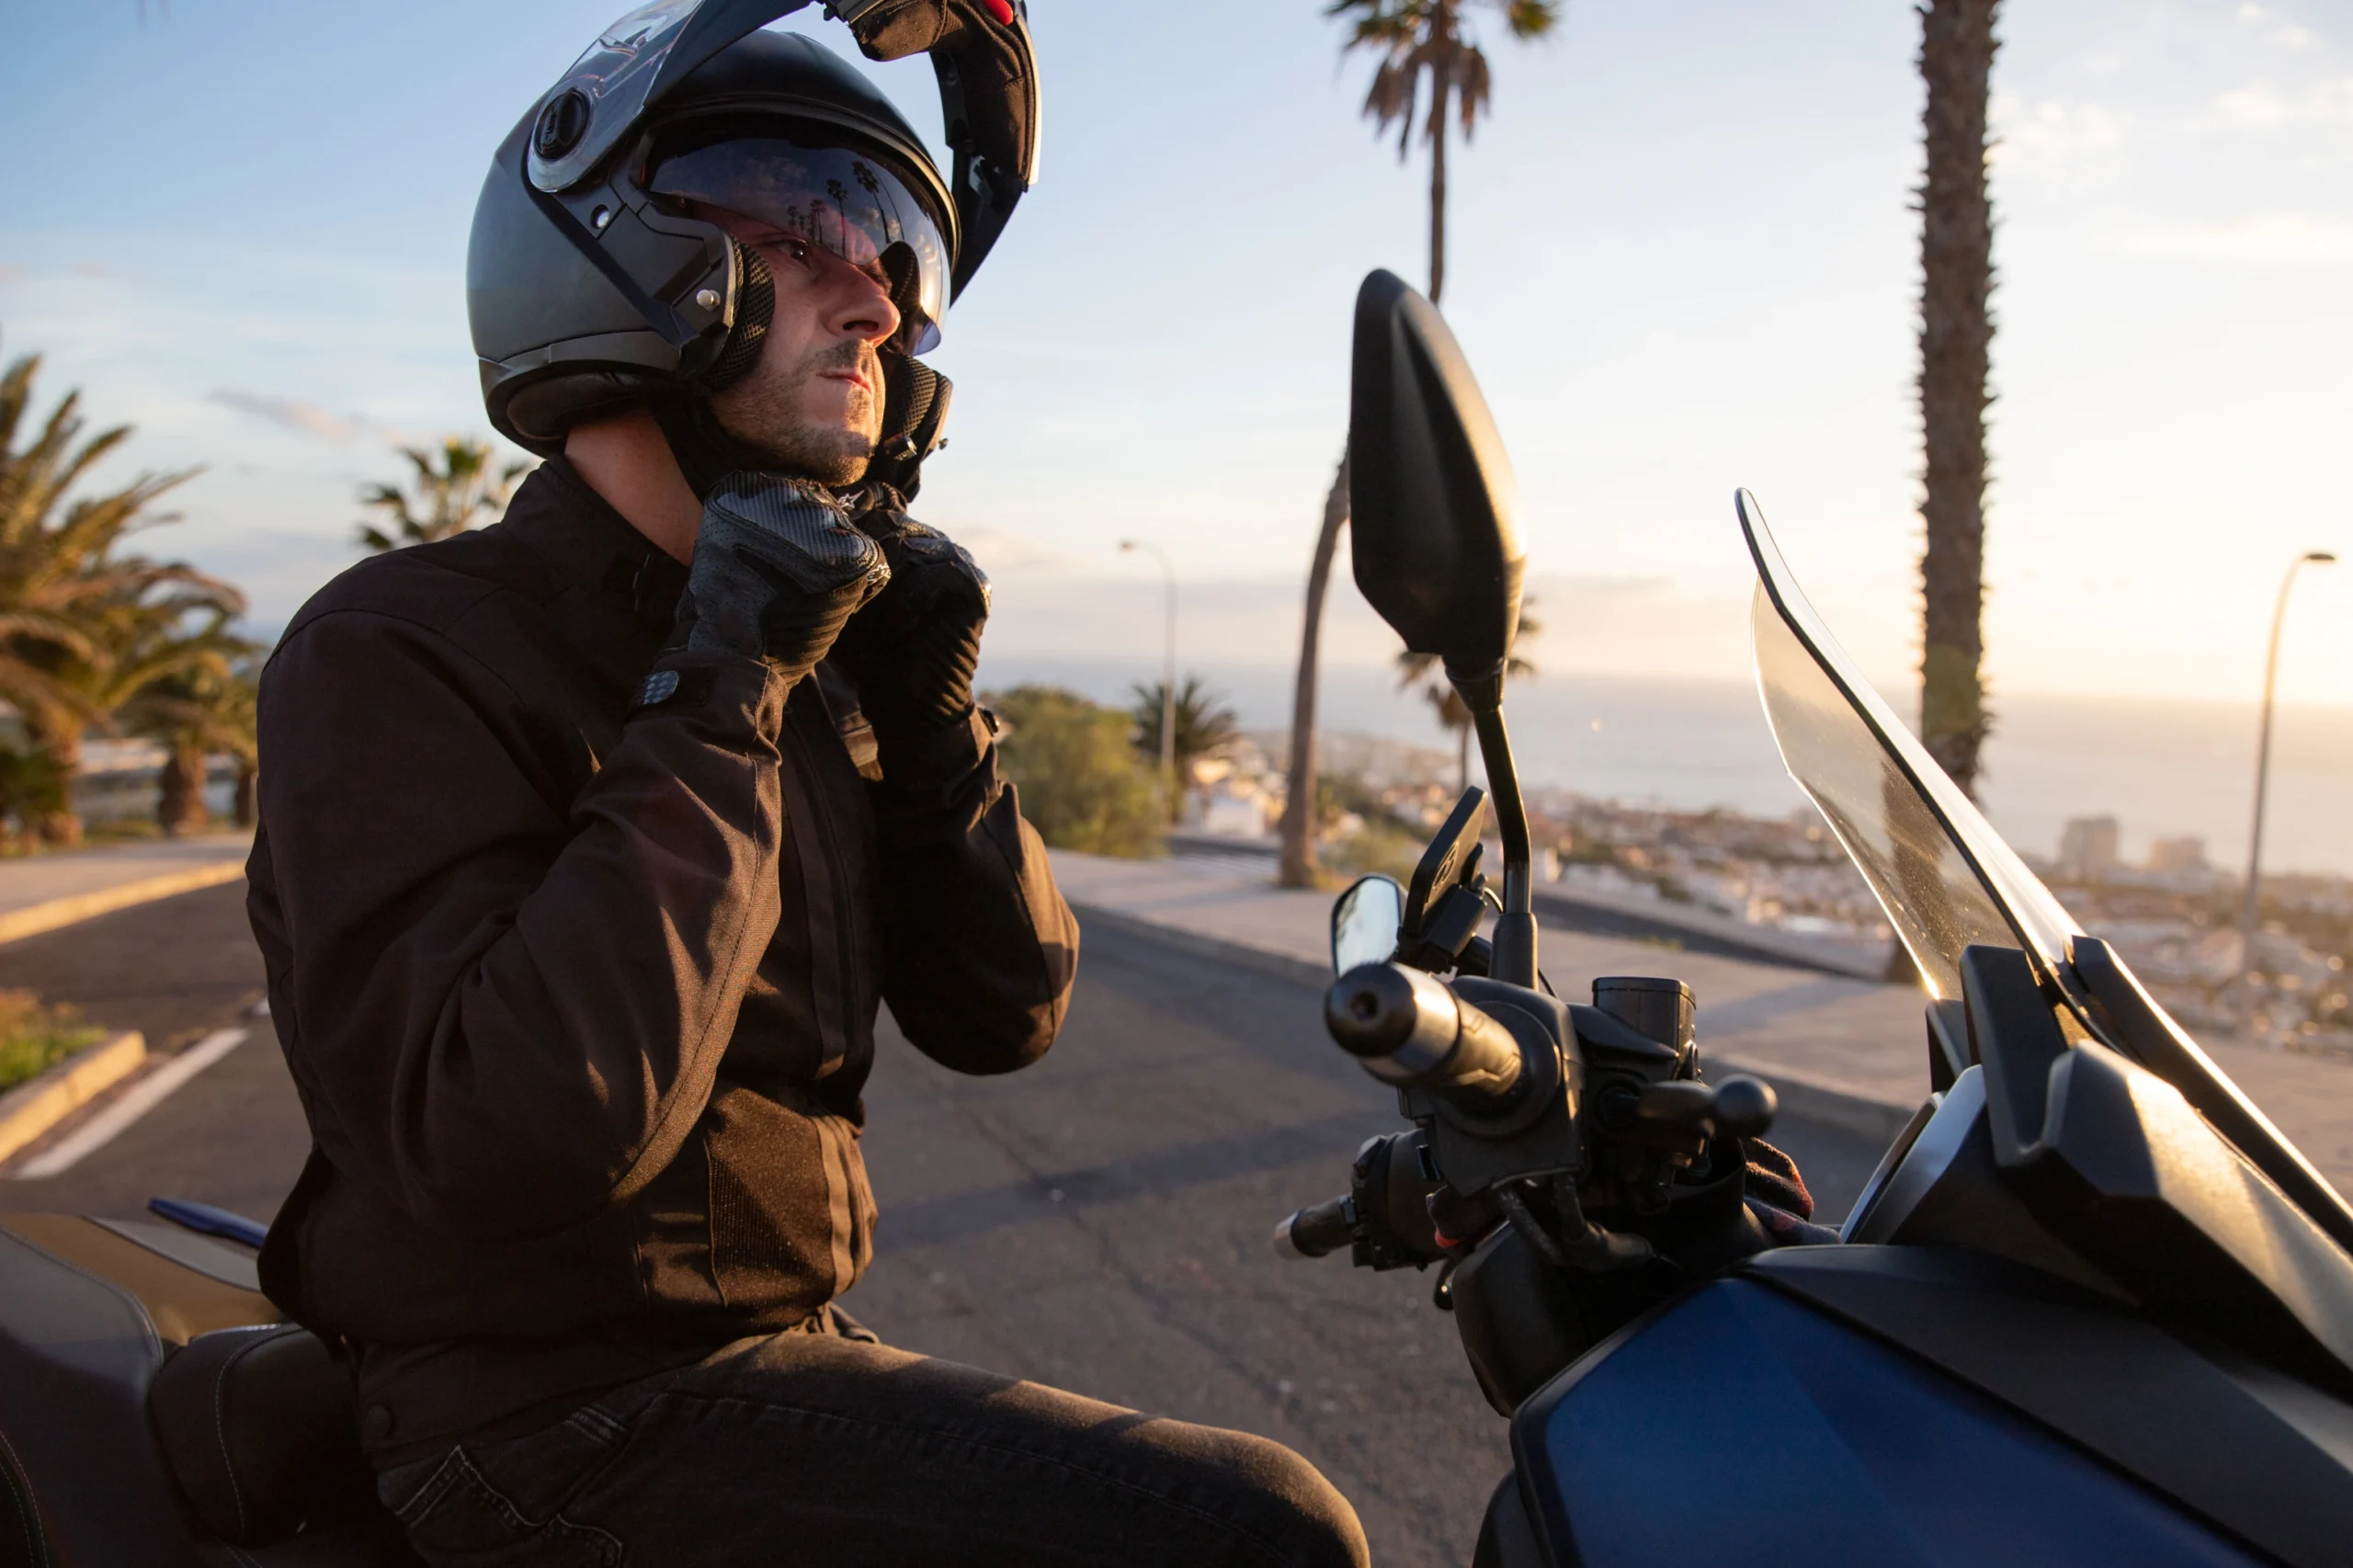 The Benefits of Wearing Motorcycle Safety Gear